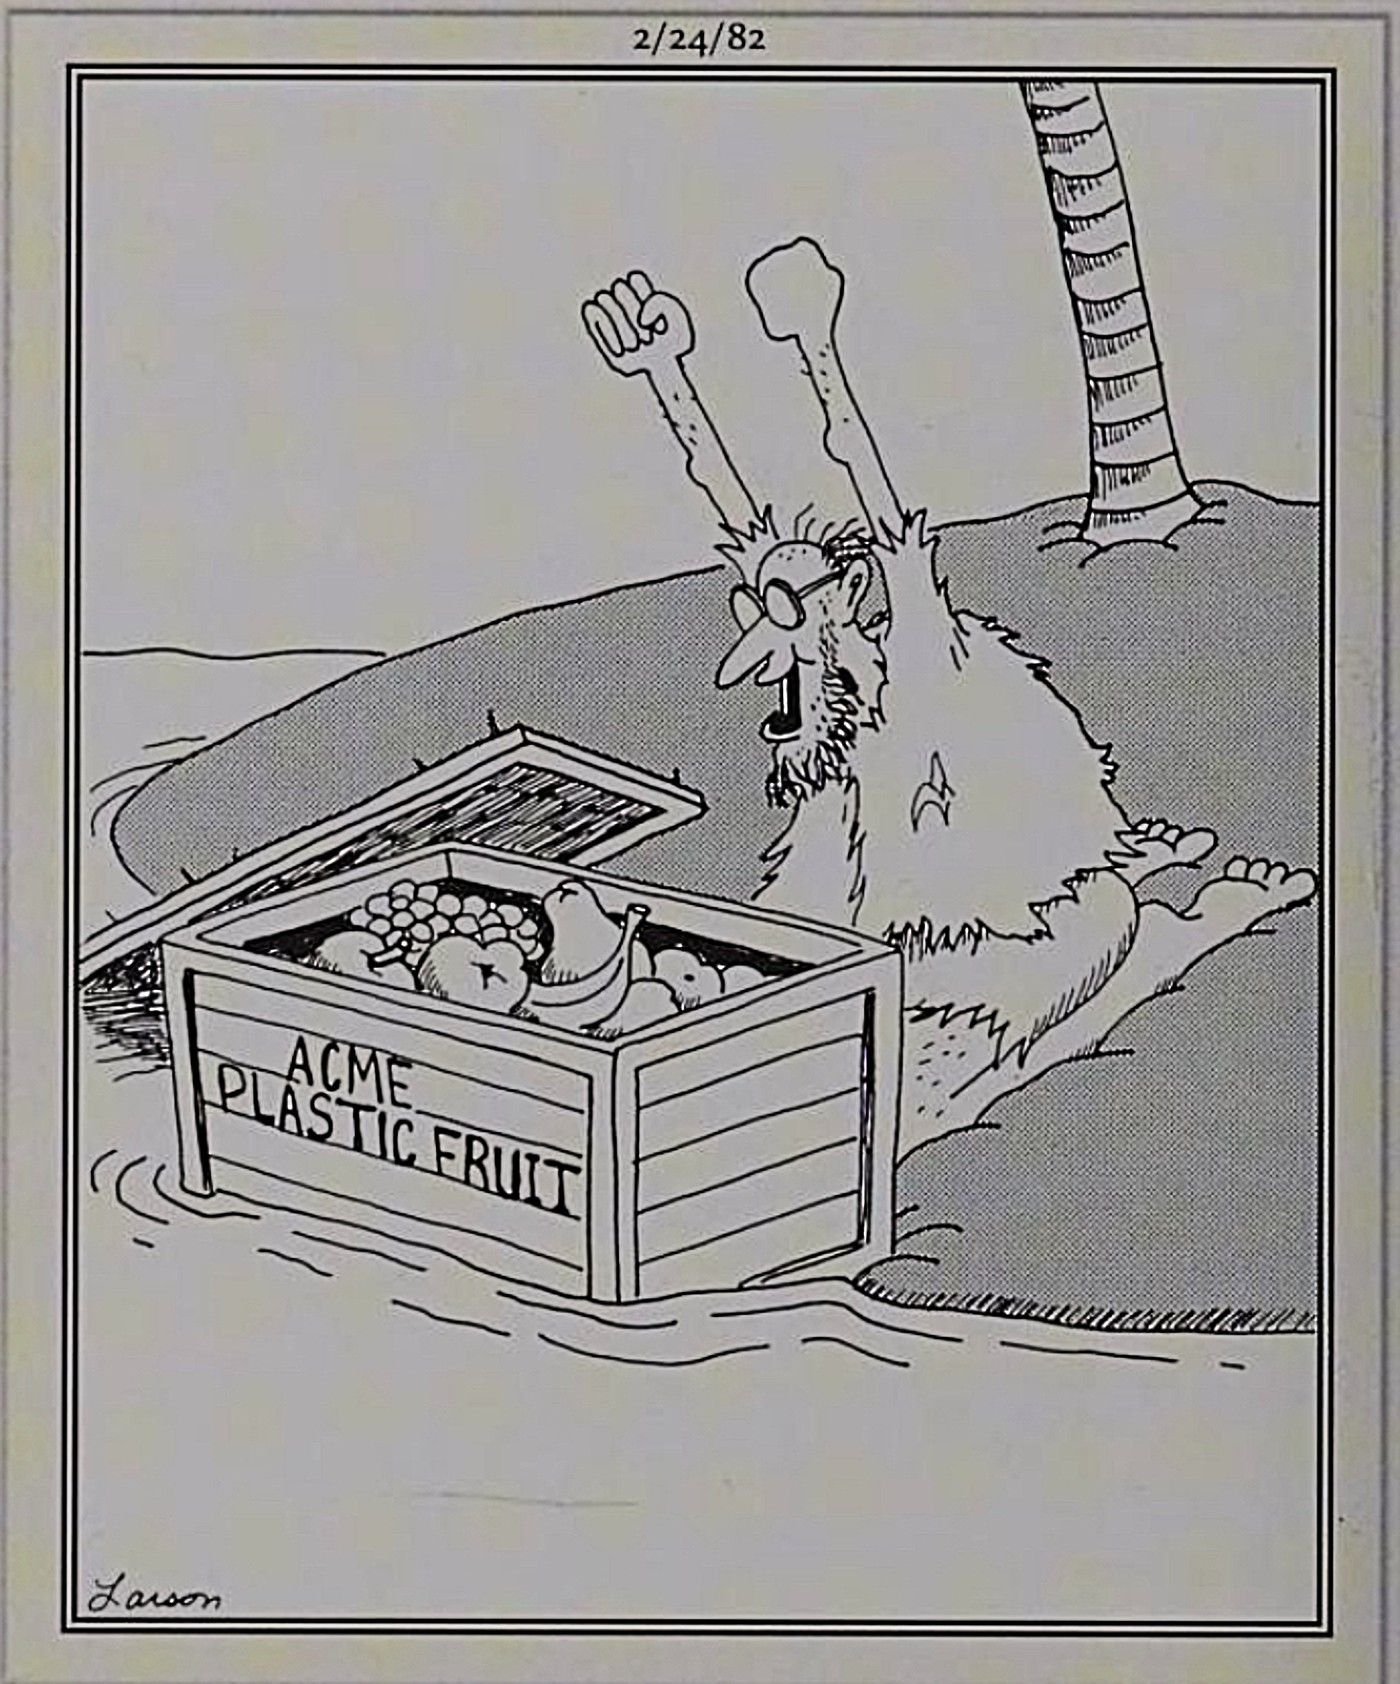 Far Side, man stranded on island is tricked by Acme plastic fruit